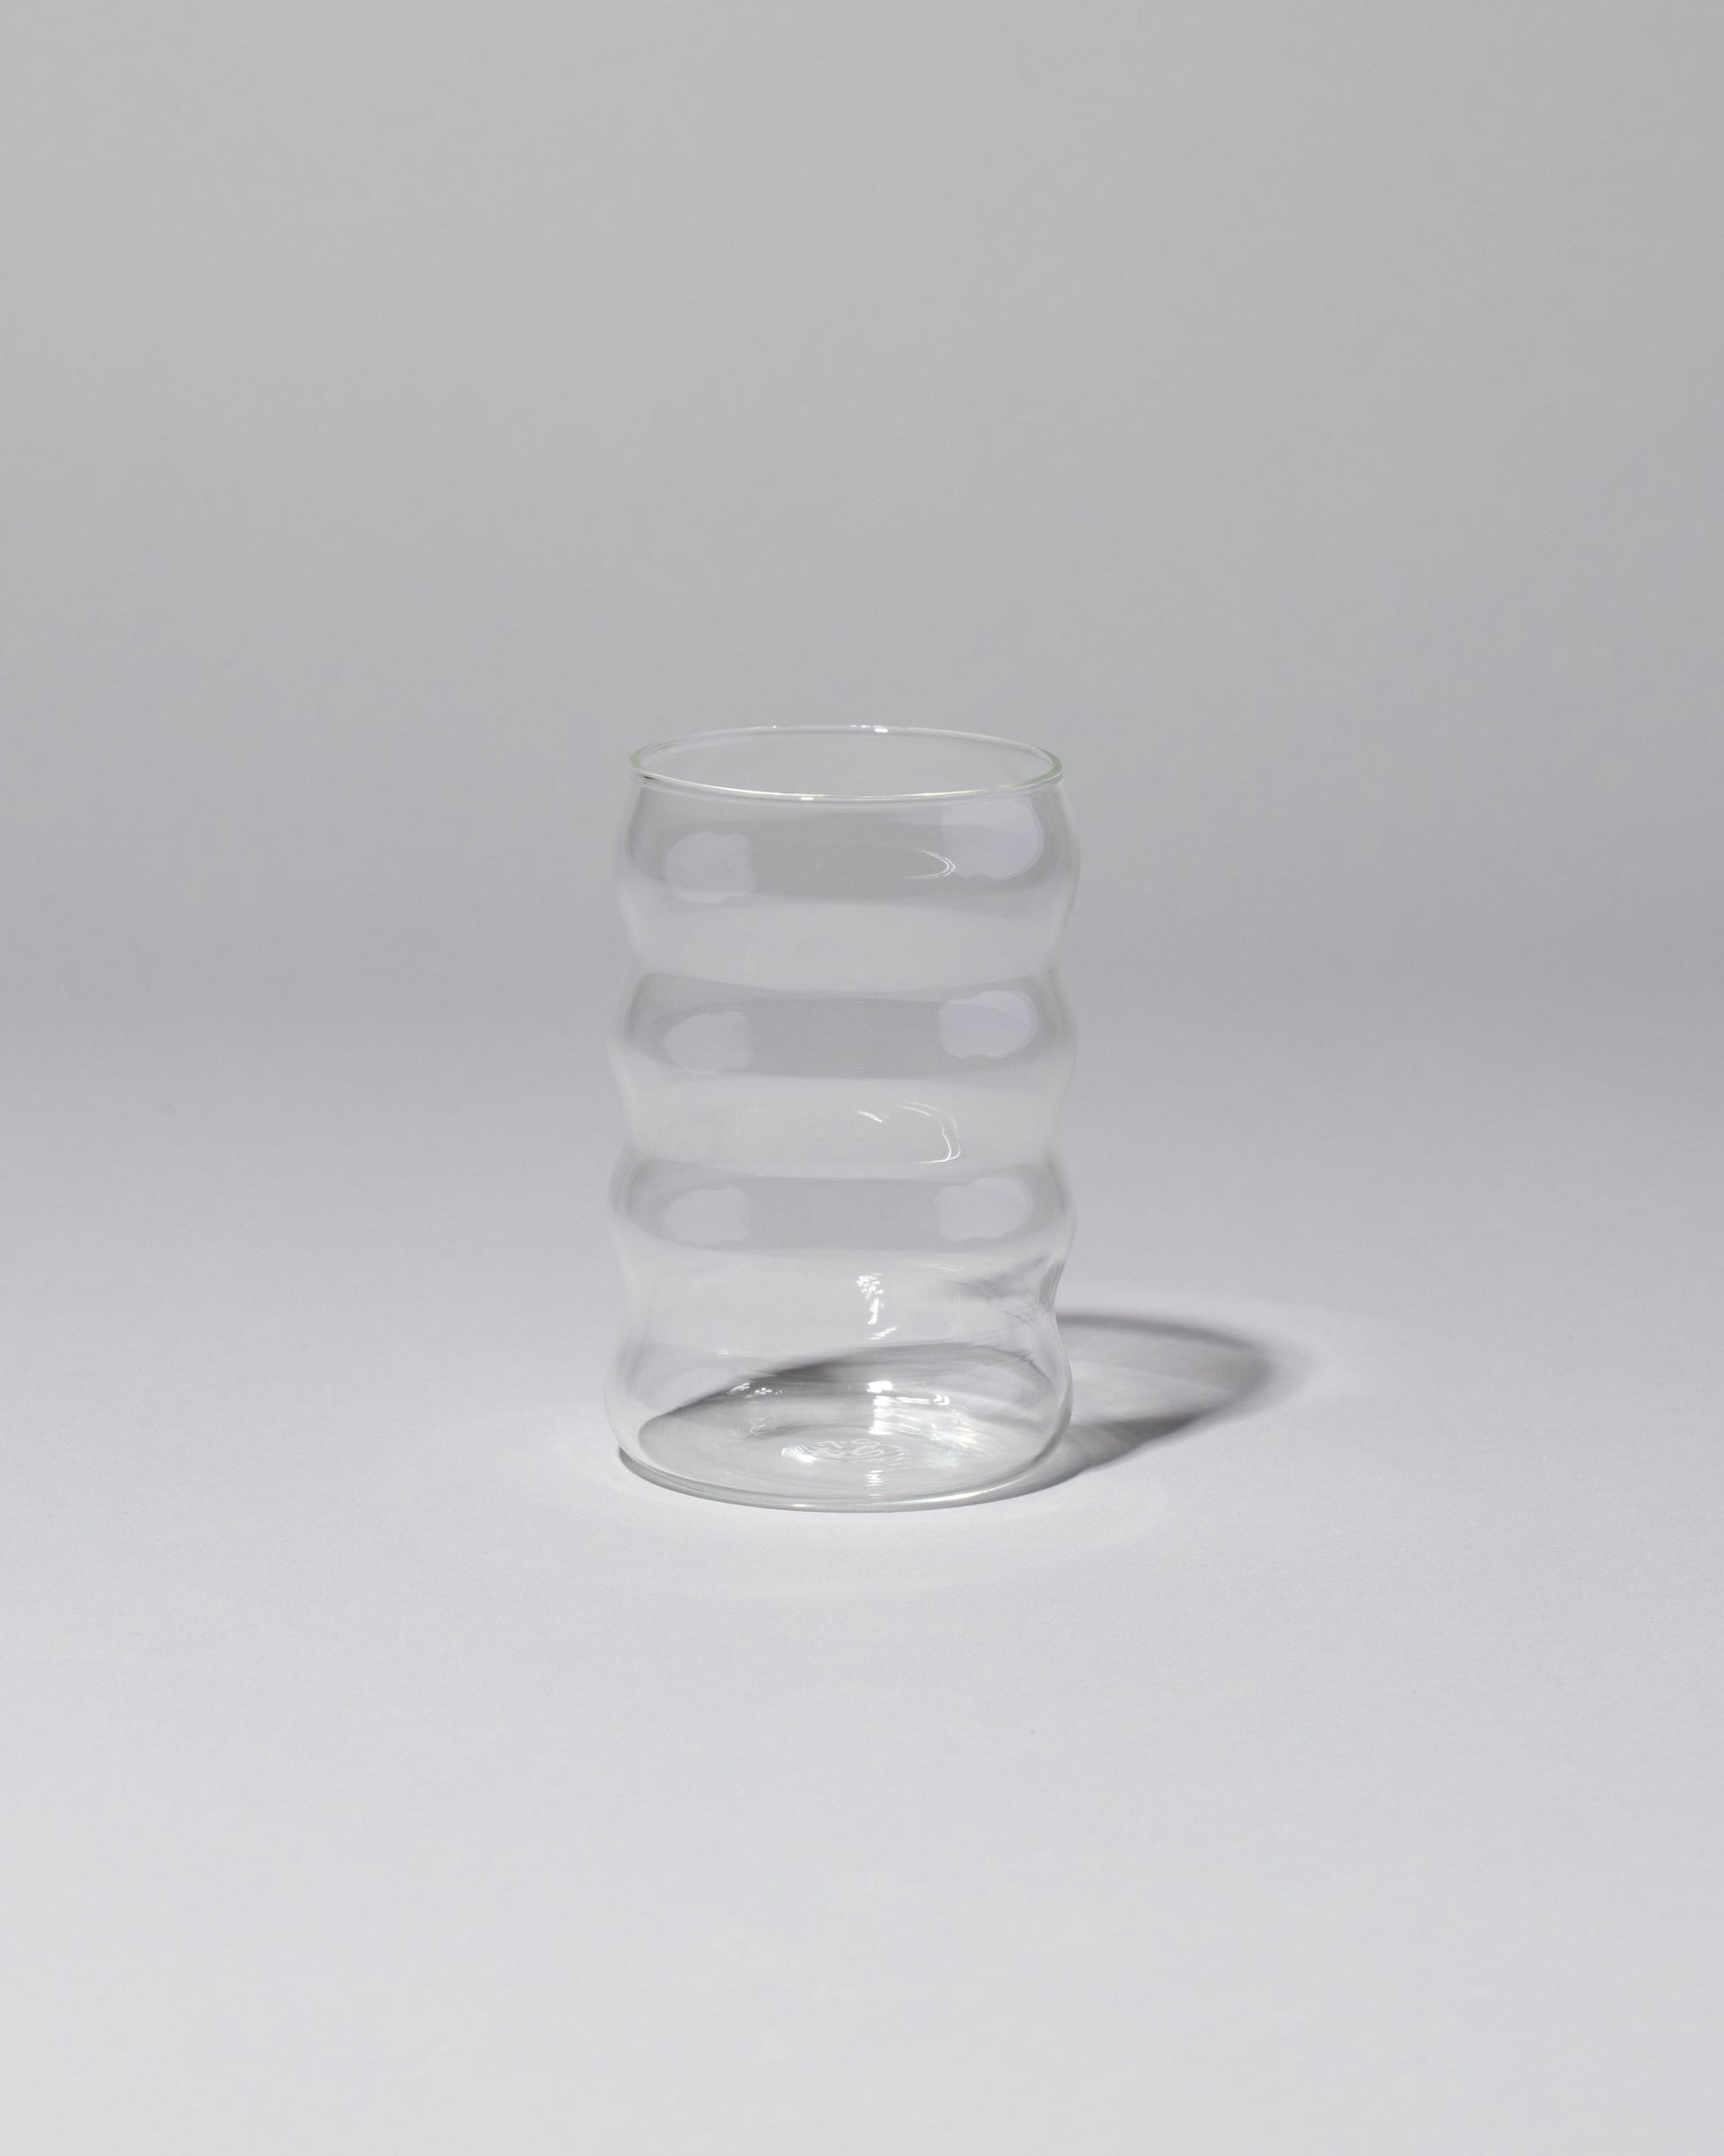 Sophie Lou Jacobsen Large Clear Single Ripple Cup on light color background.